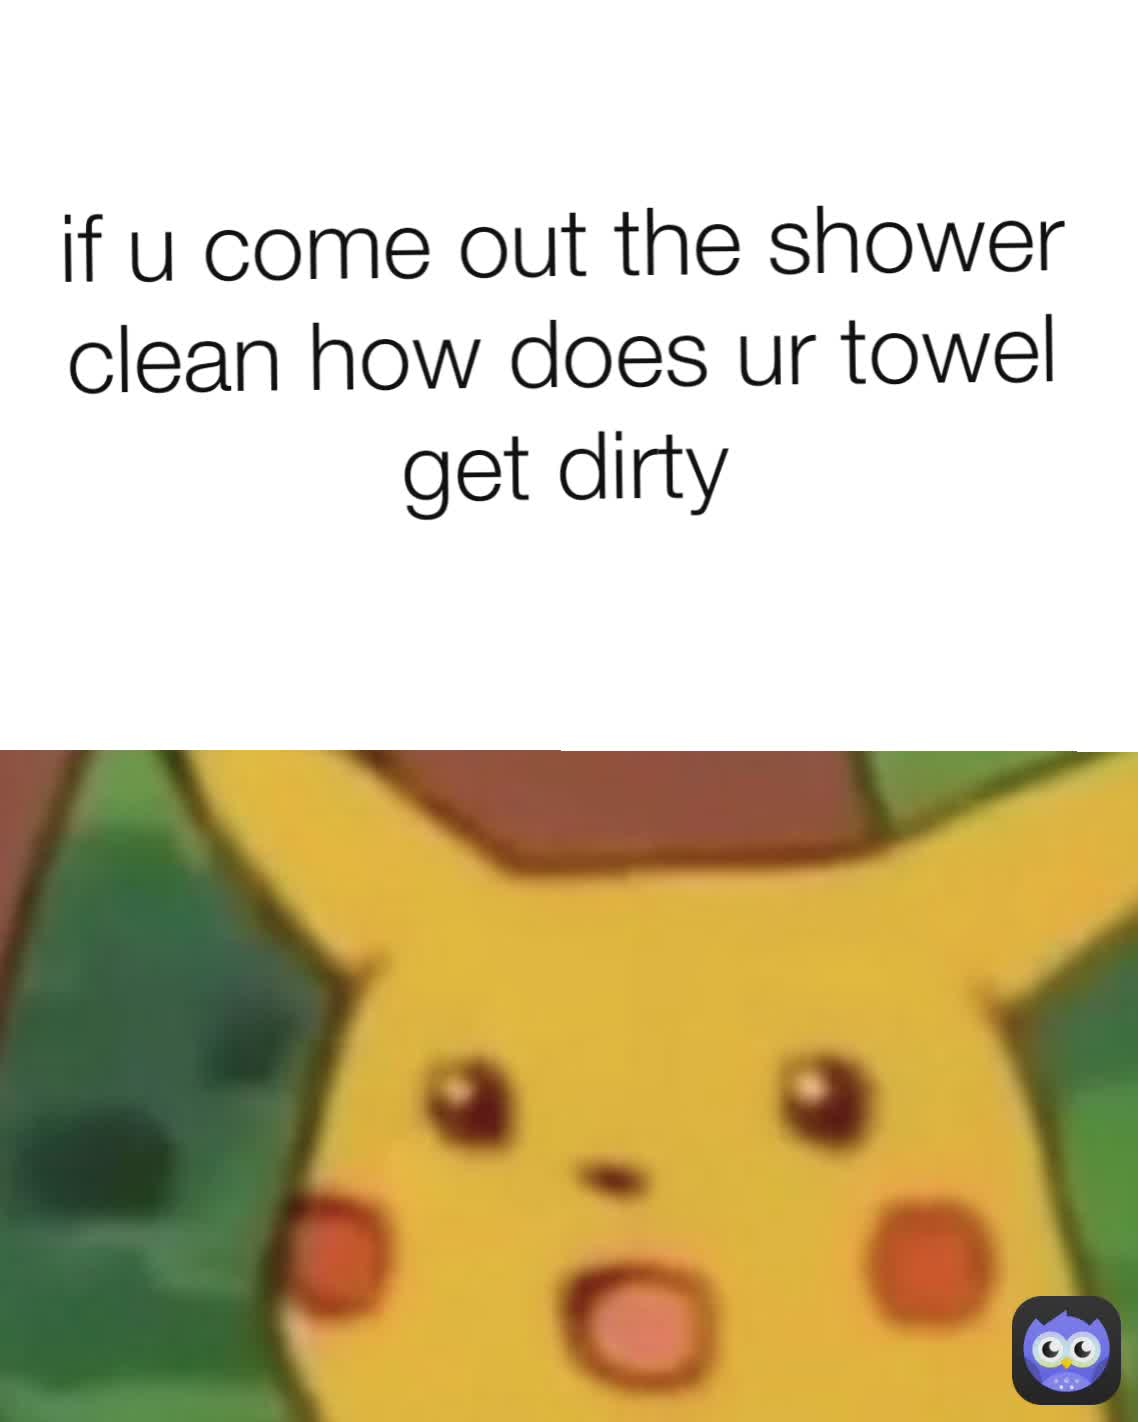 if u come out the shower clean how does ur towel get dirty